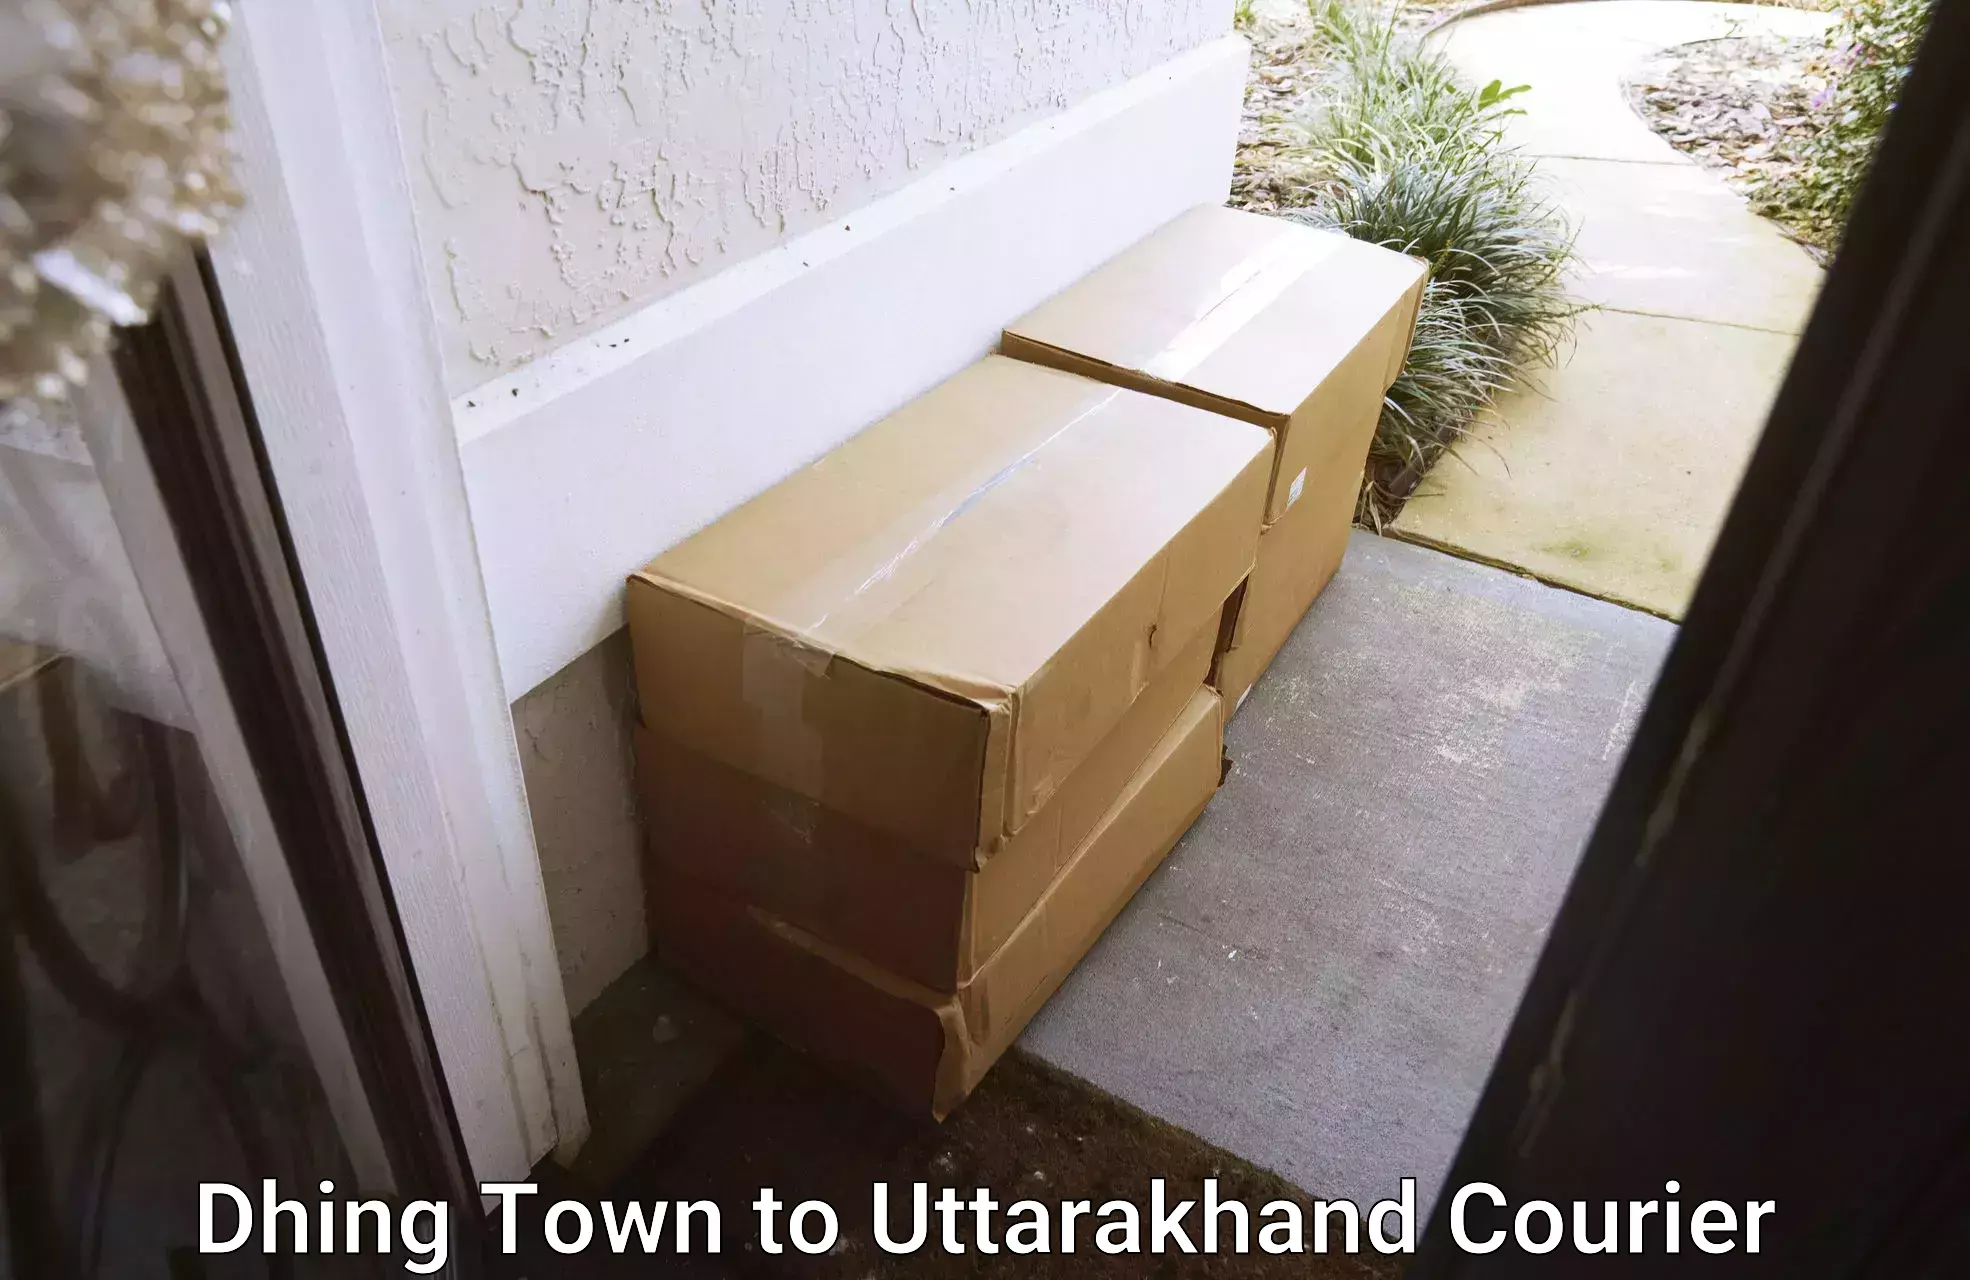 Express postal services Dhing Town to Uttarakhand